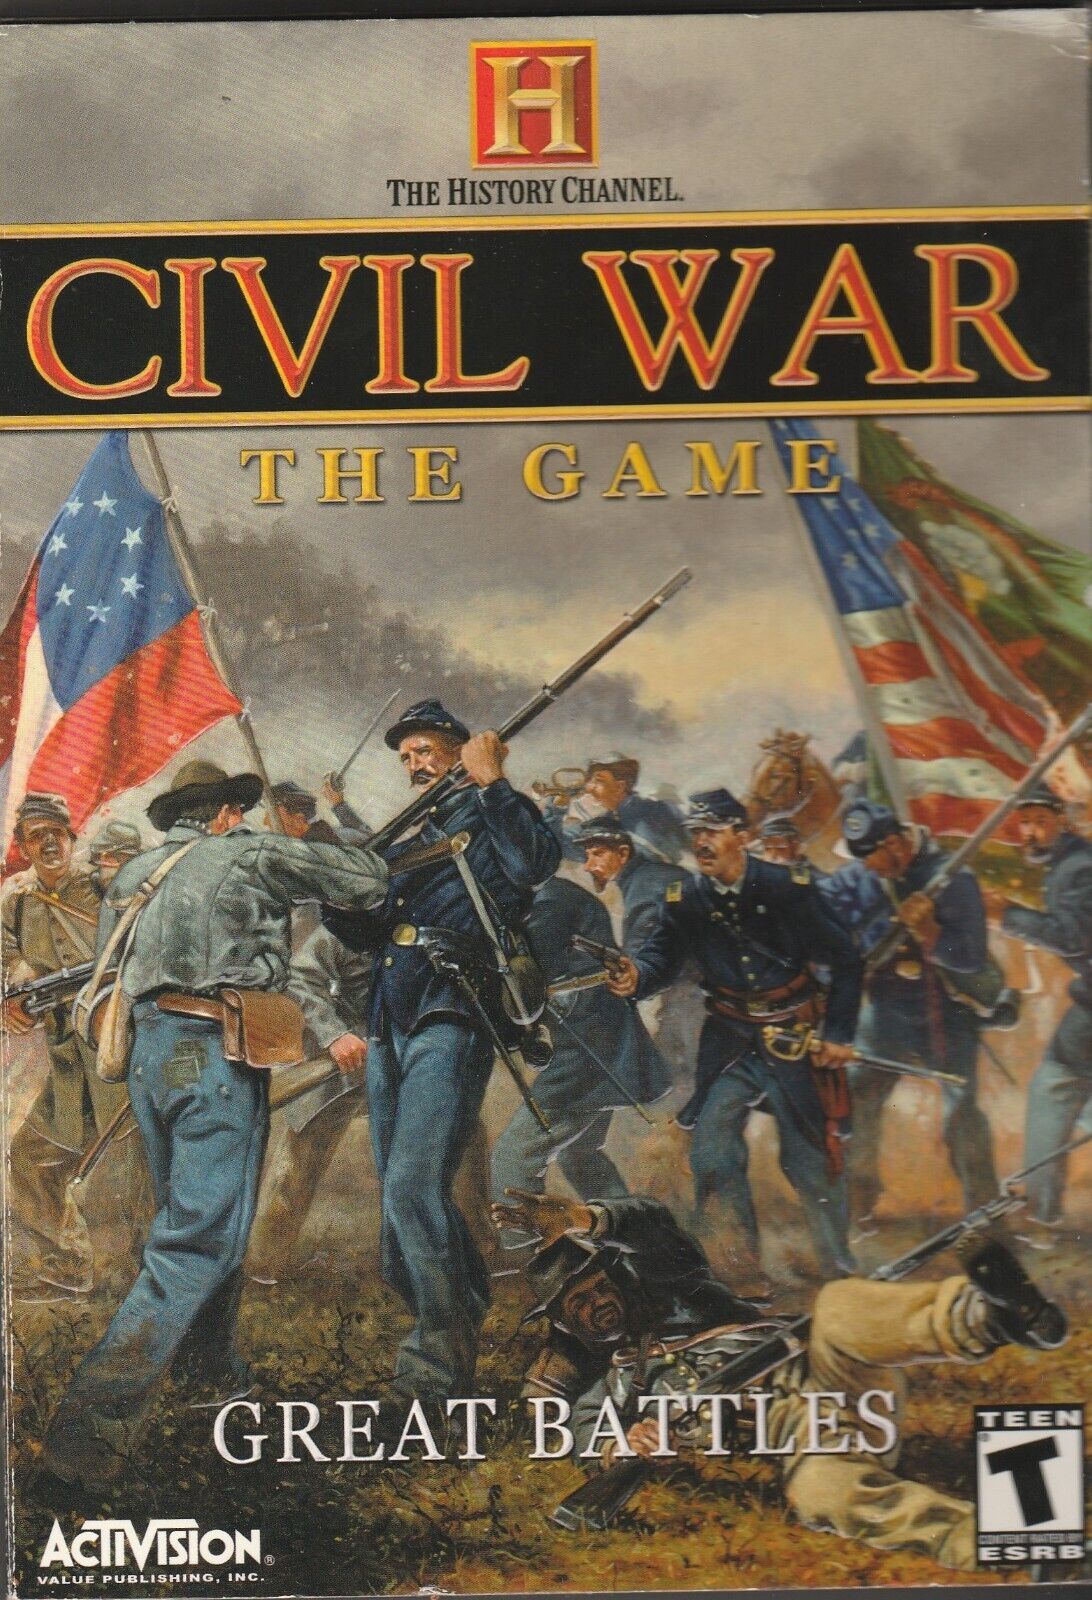 Civil War-The Game Great Battles PC CD-Rom Game by Activision  2002